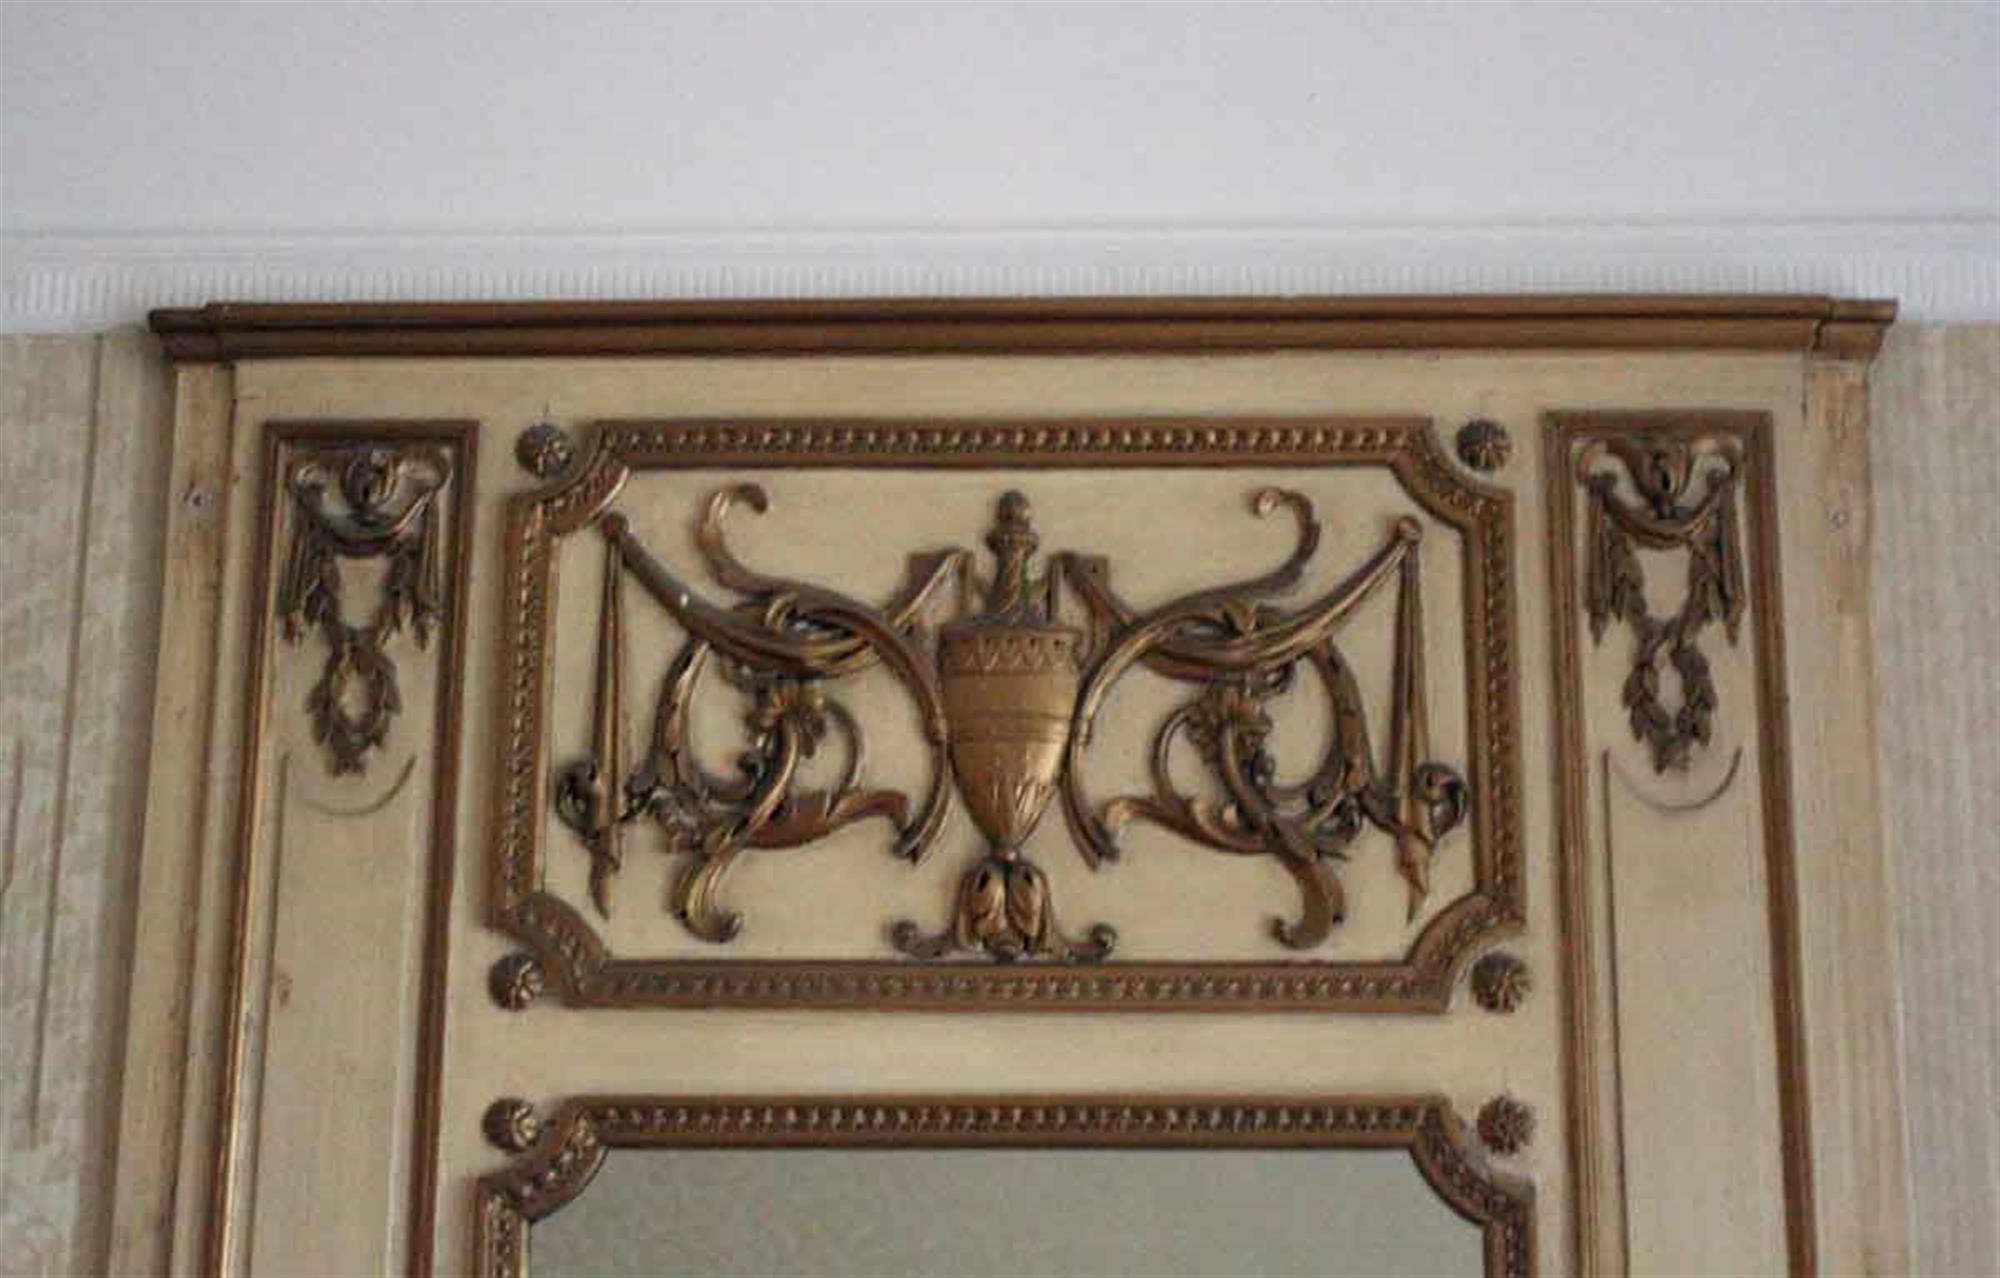 1931 NYC Waldorf Astoria Hotel tan wood over mantel mirror with carved golden brown details and a large urn in the top centre. From room 765. The original paired mantel is not available. Waldorf Astoria authenticity card included with your purchase.